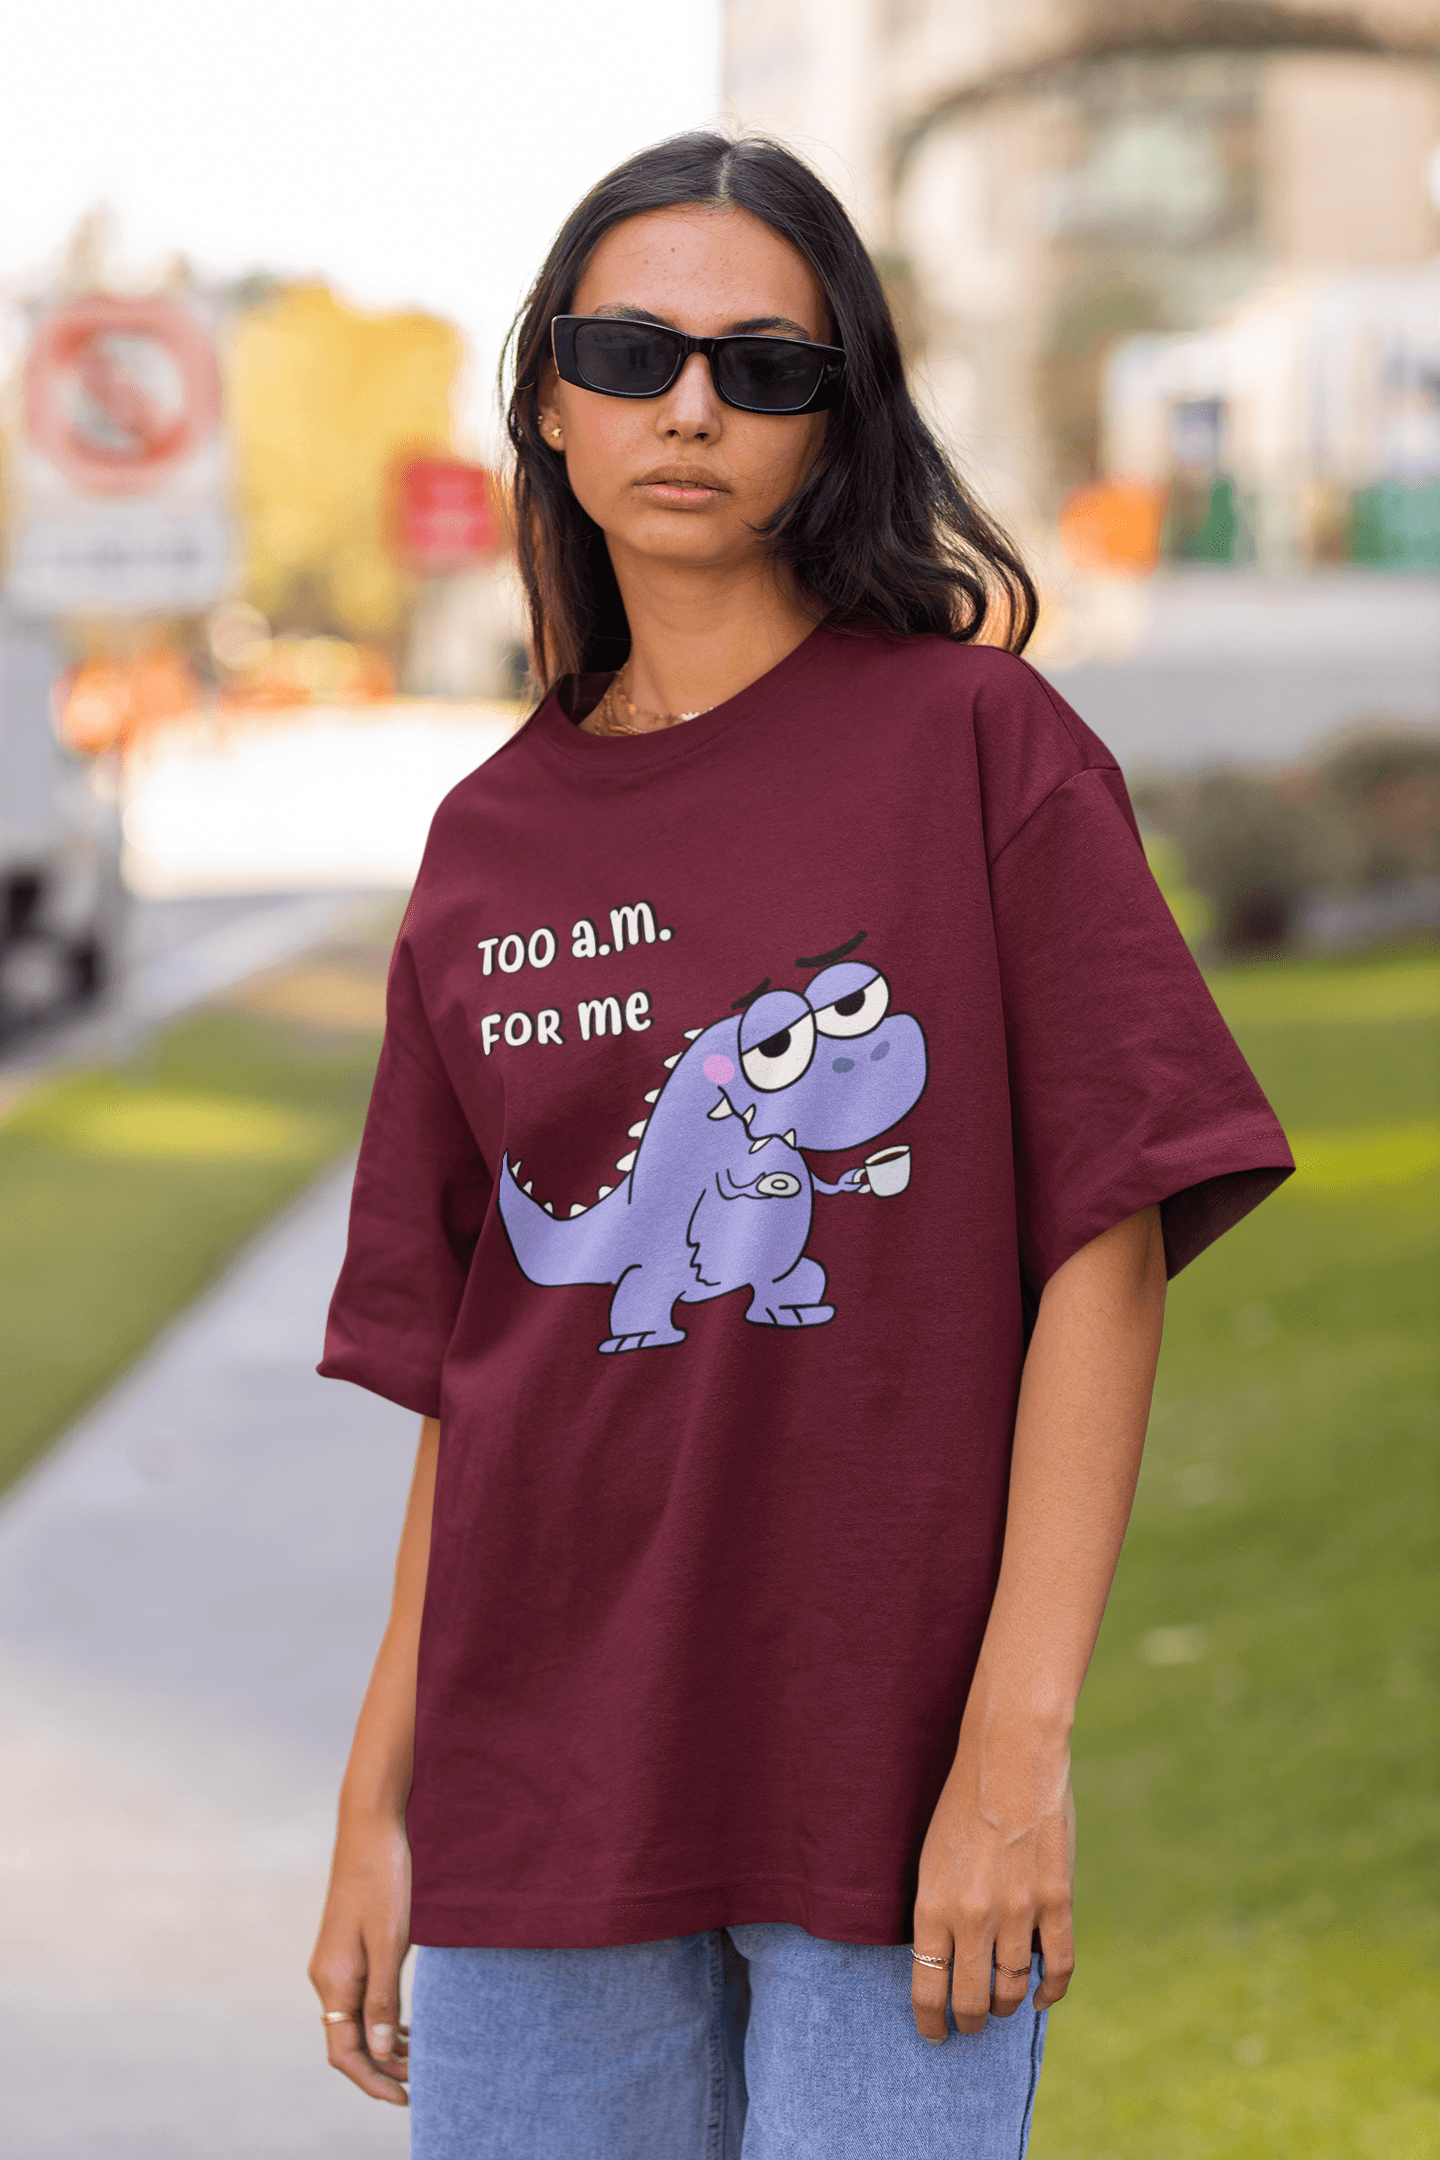 Too A.M. For Me- T-Rex Unisex Oversized T-shirts - Cute Stuff India